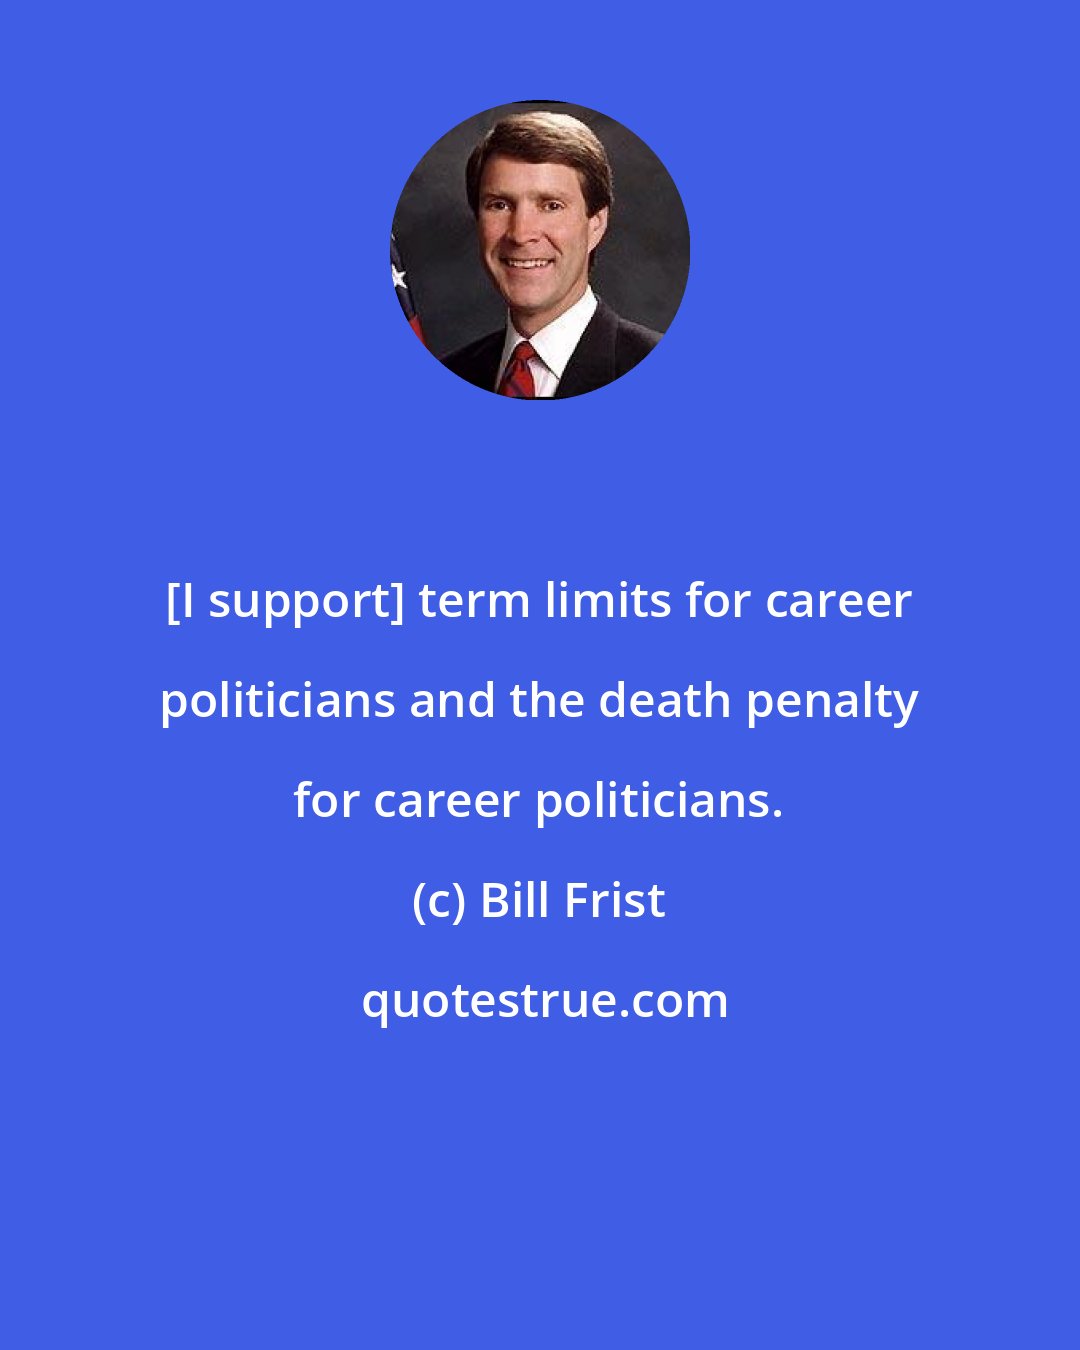 Bill Frist: [I support] term limits for career politicians and the death penalty for career politicians.